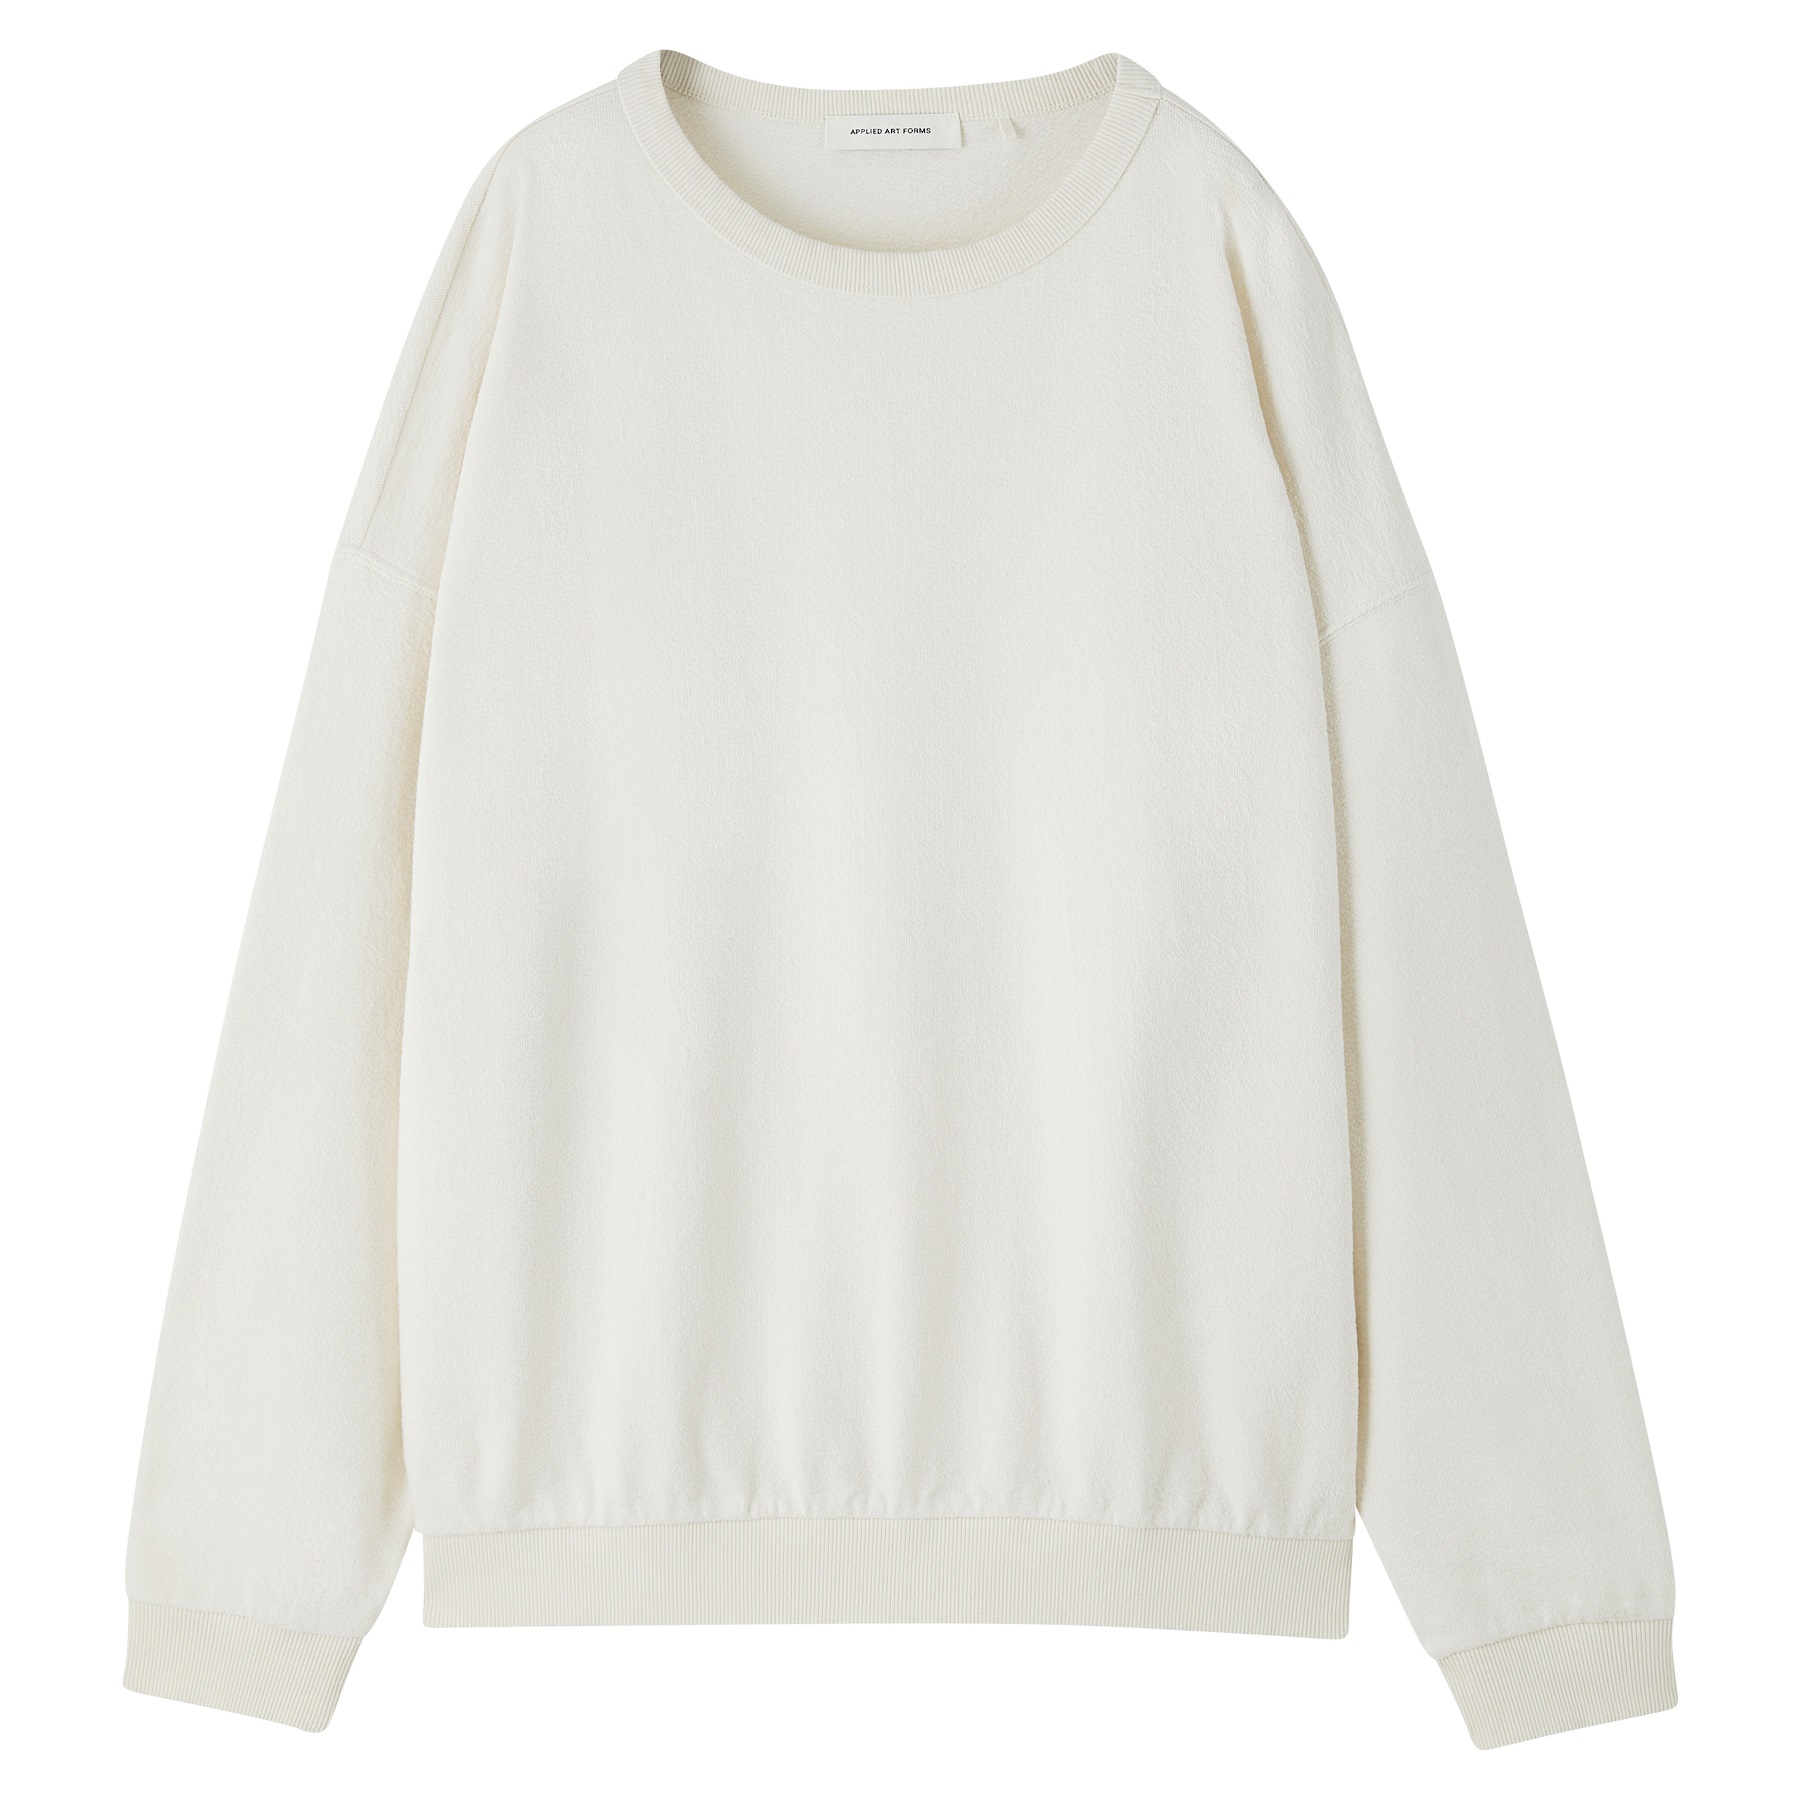 APPLIED ART FORMS Structured Sweater in Ecru